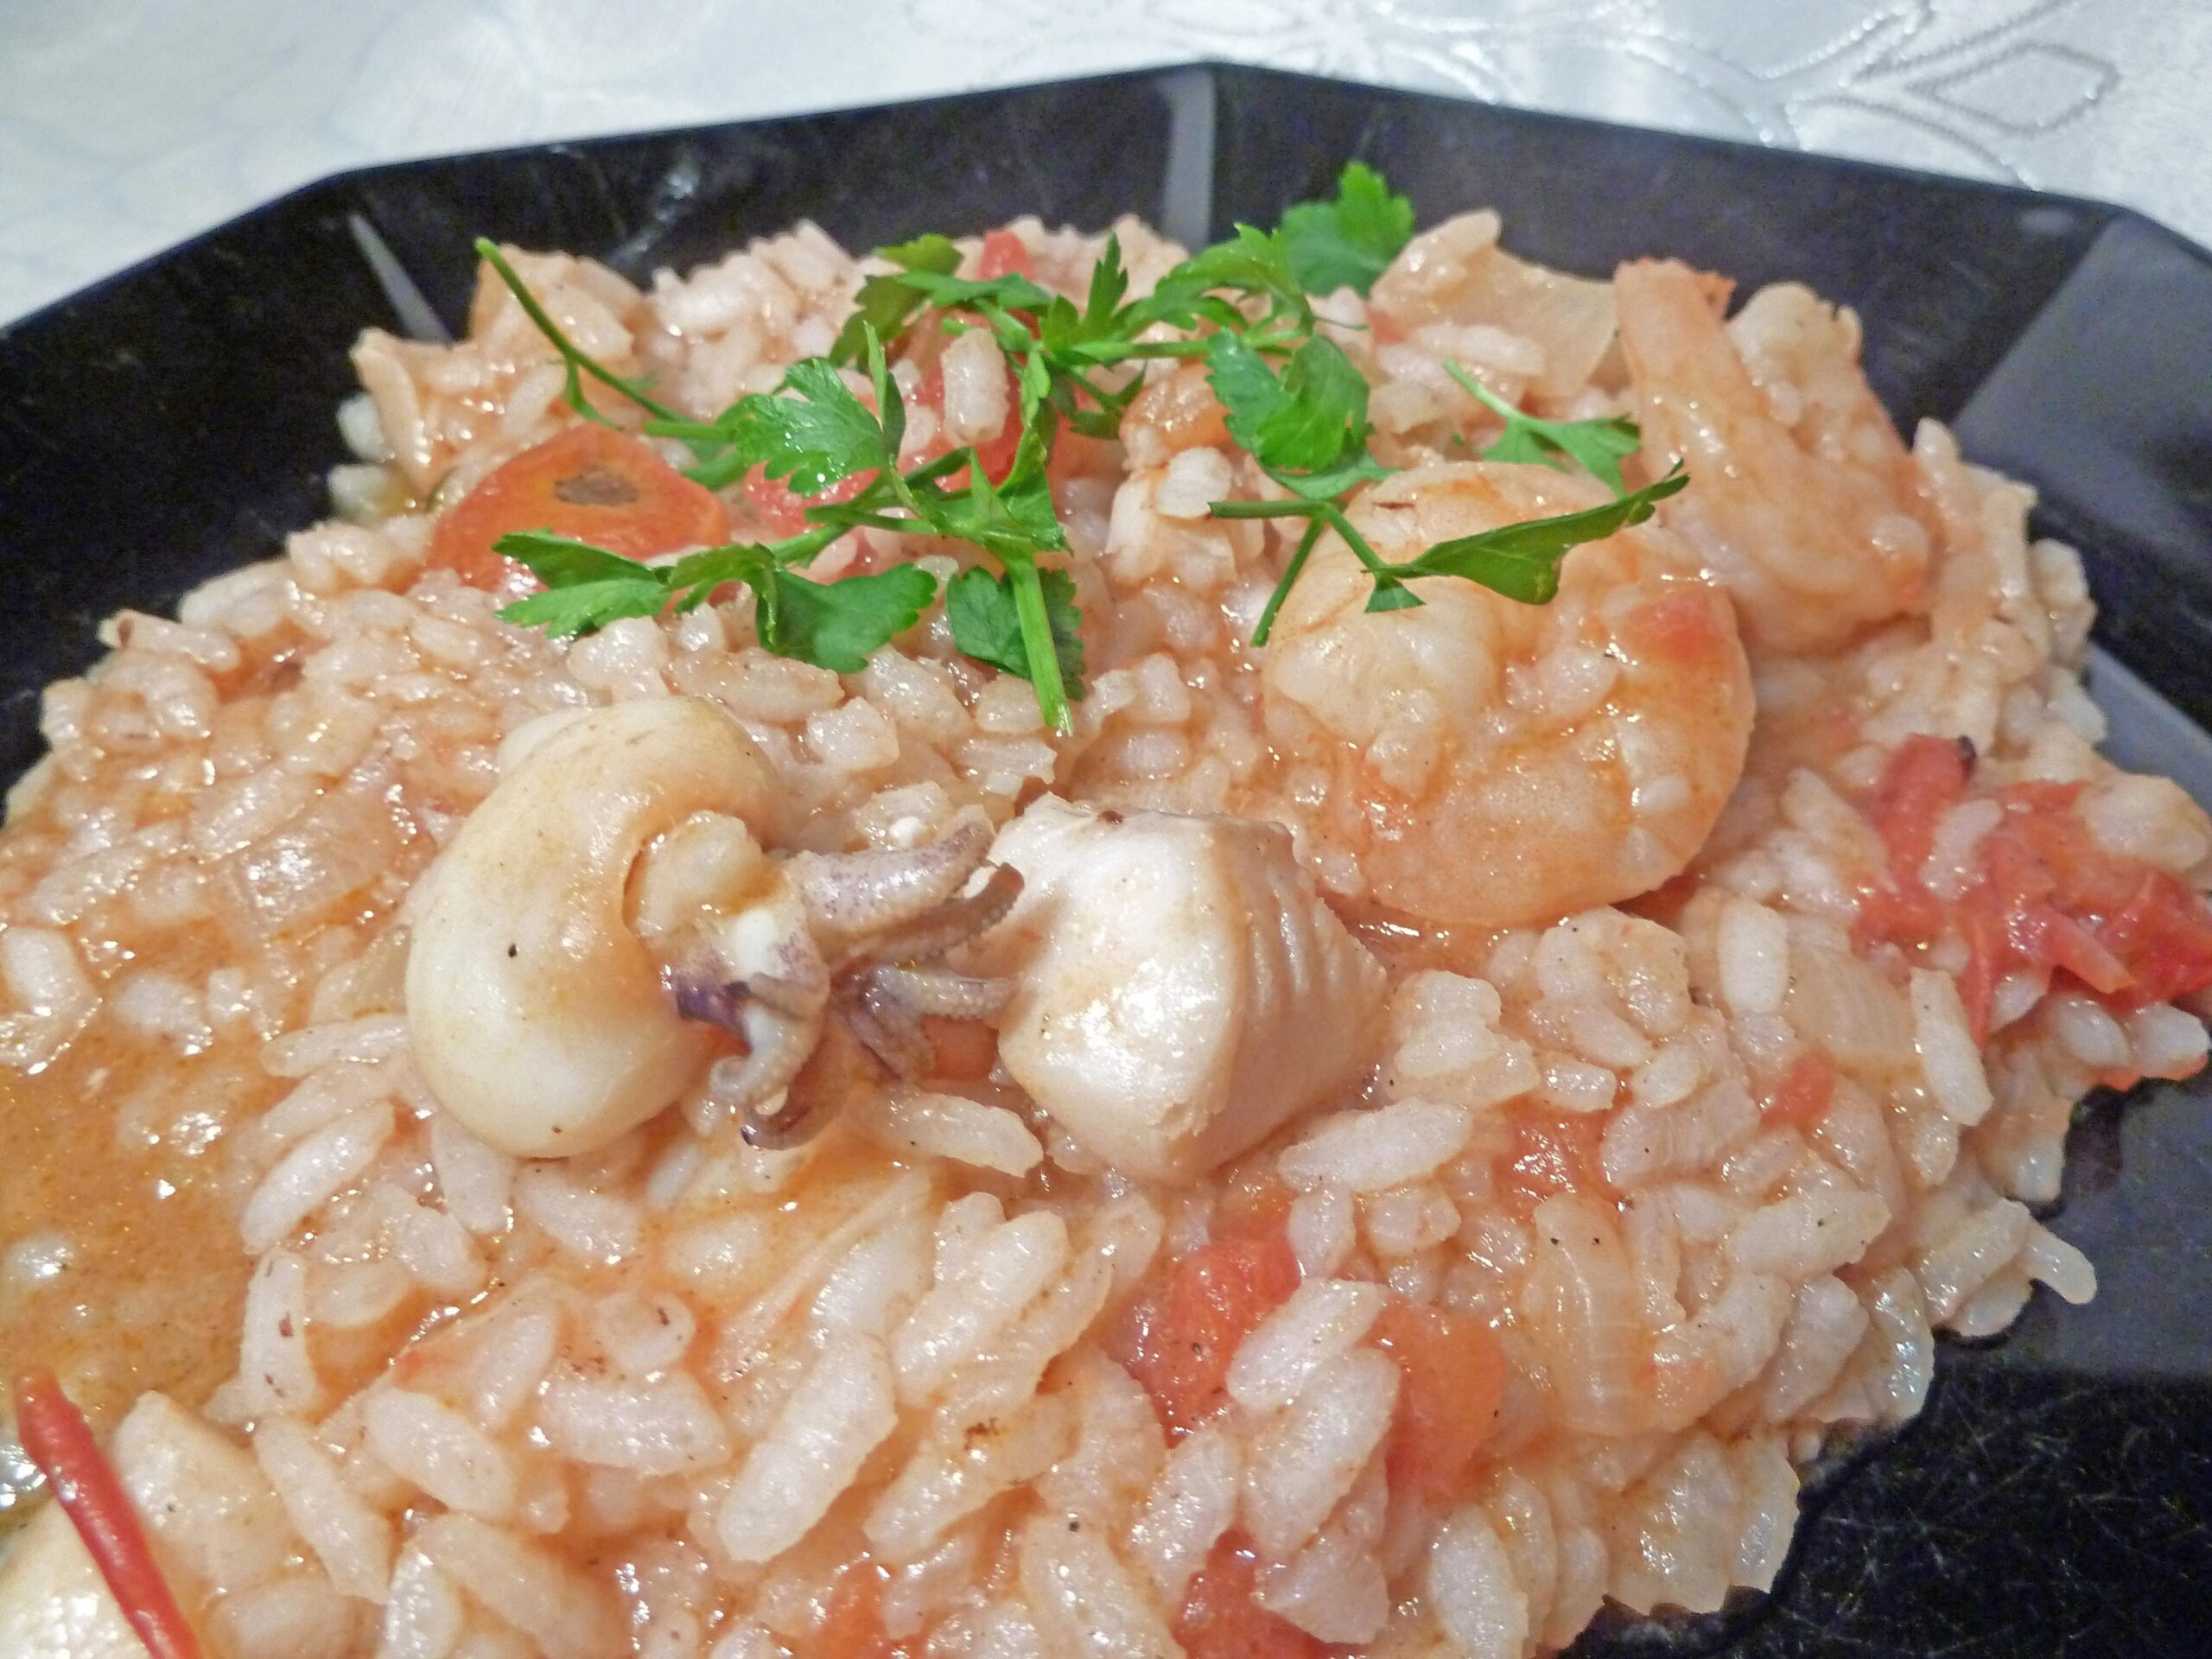  Dive into the flavors of the sea with this Arroz de Marisco recipe.